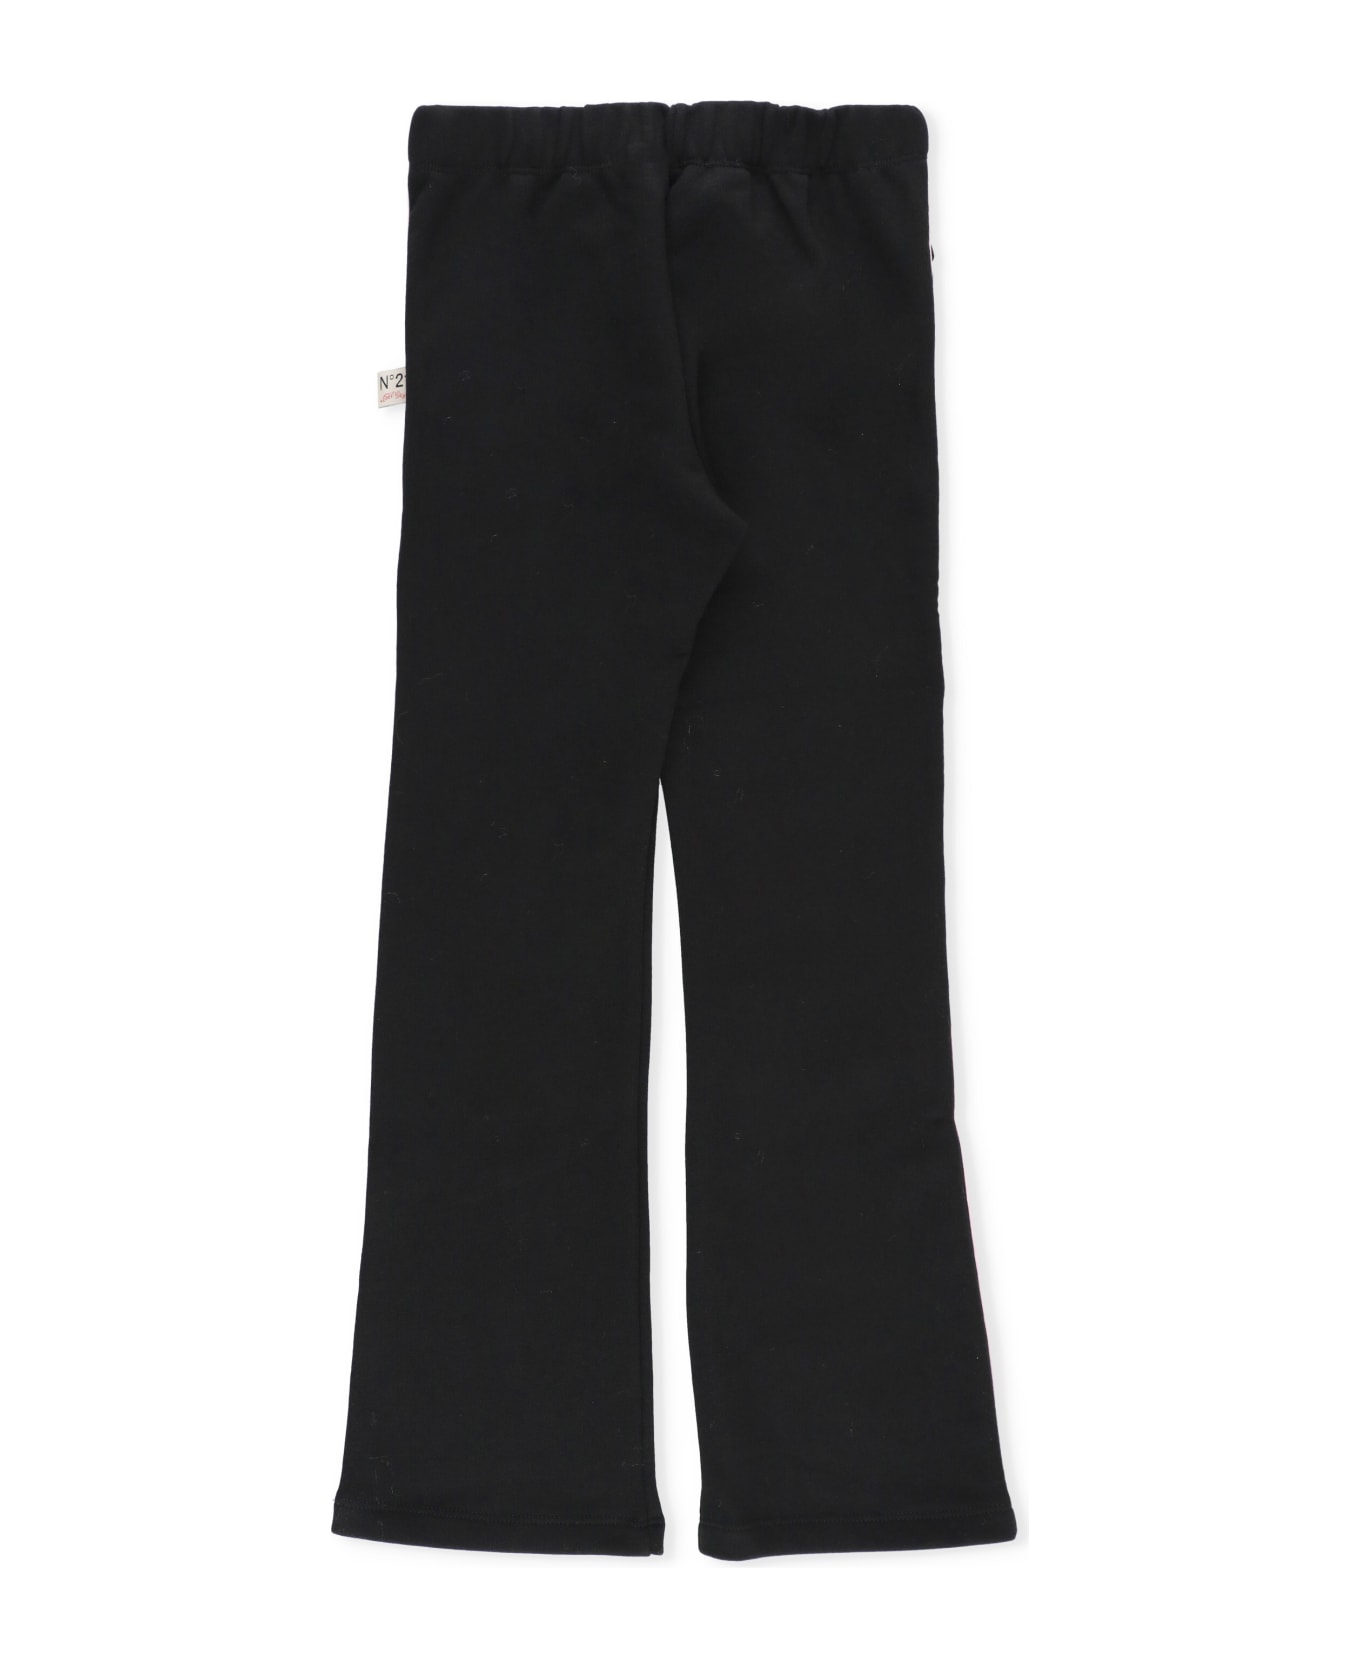 N.21 Cotton Trousers - Black ボトムス